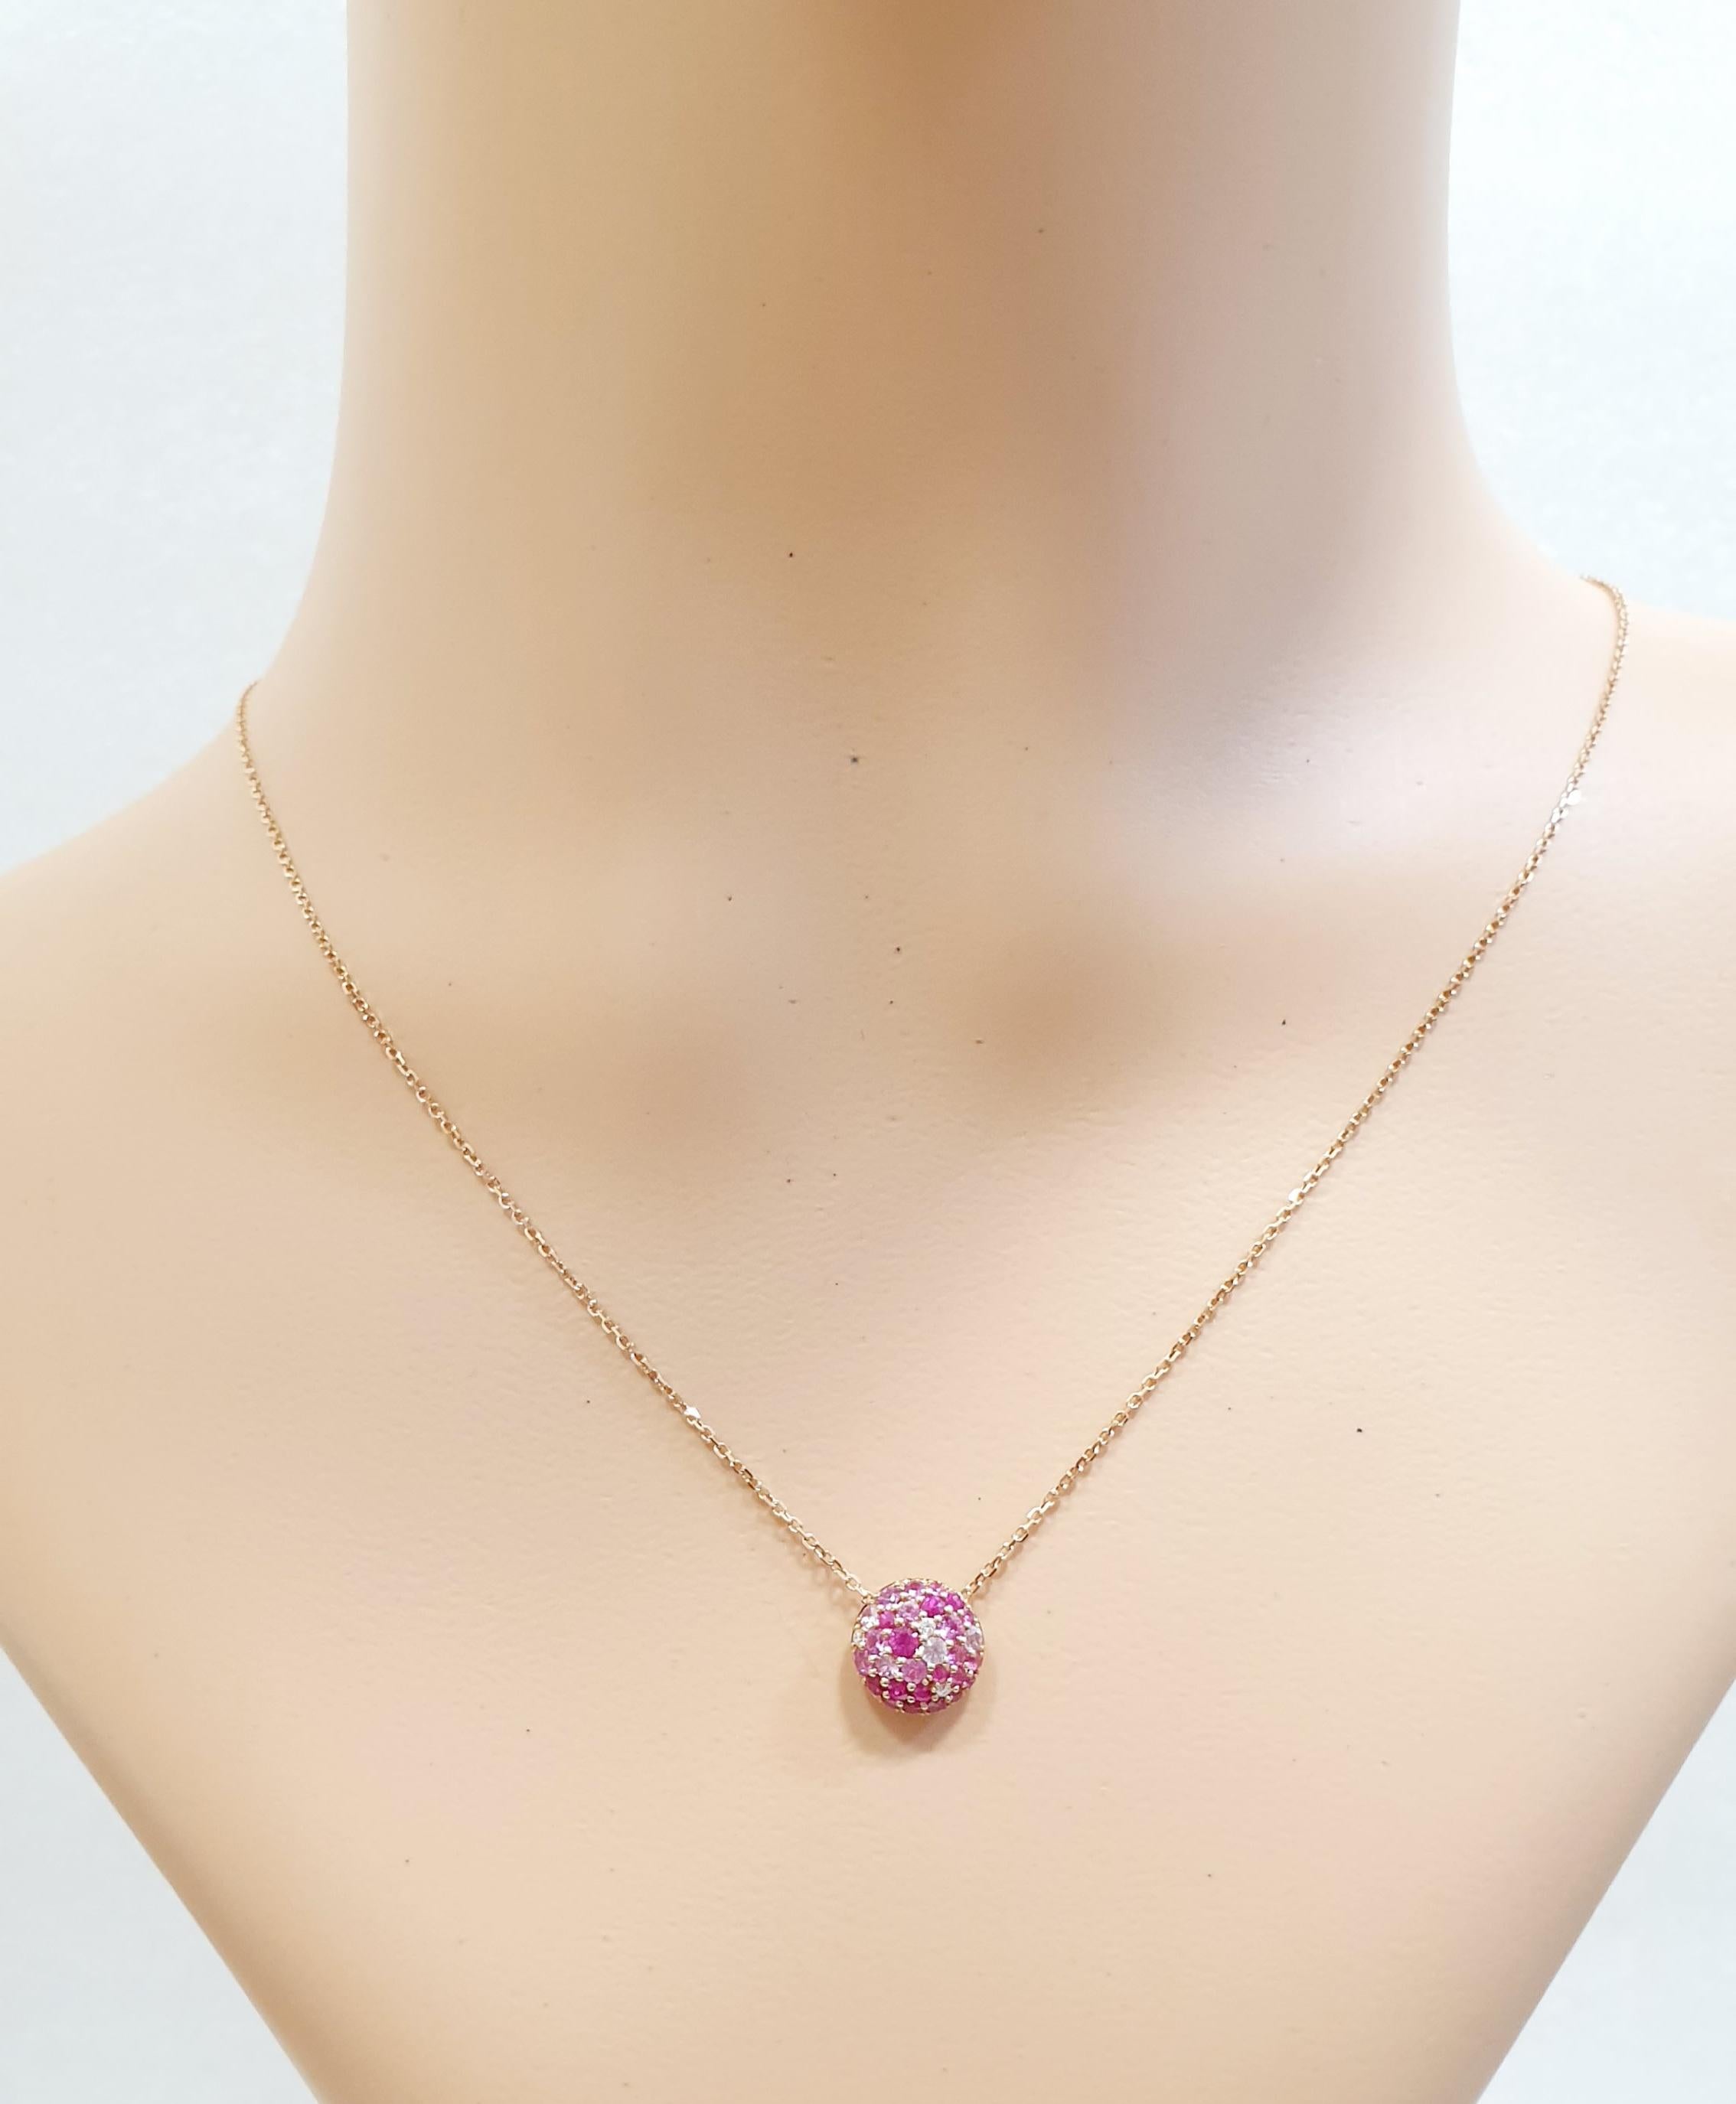 18 karat Rose Gold Chain with pavée of  Ruby ​​and Diamond Pendant

READY TO SHIP
*Shipment of this piece is not affected by COVID-19. Orders welcome!

MATERIAL
◘ Weight 2 grams with chain
◘ Chain lenght 43cm /40cm or 16,92 inches/15,74 inches 
◘